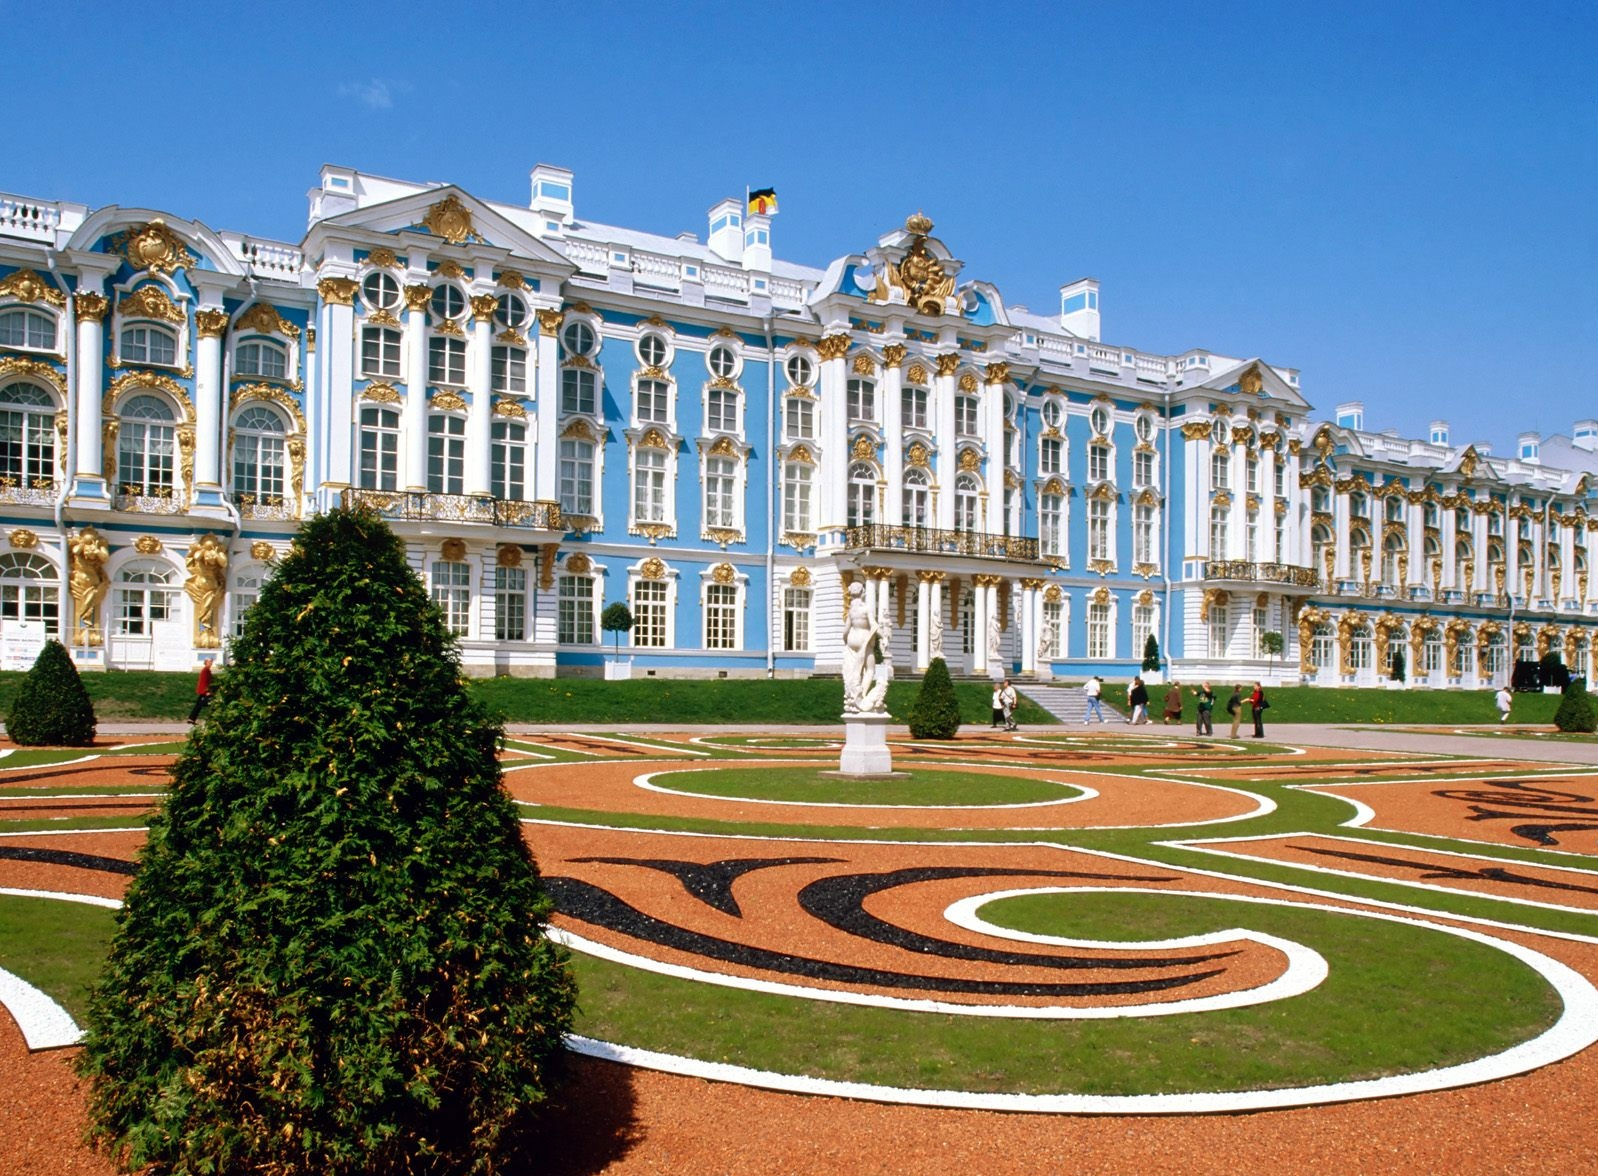 Catherine Palace- St. Petersburg, Russia